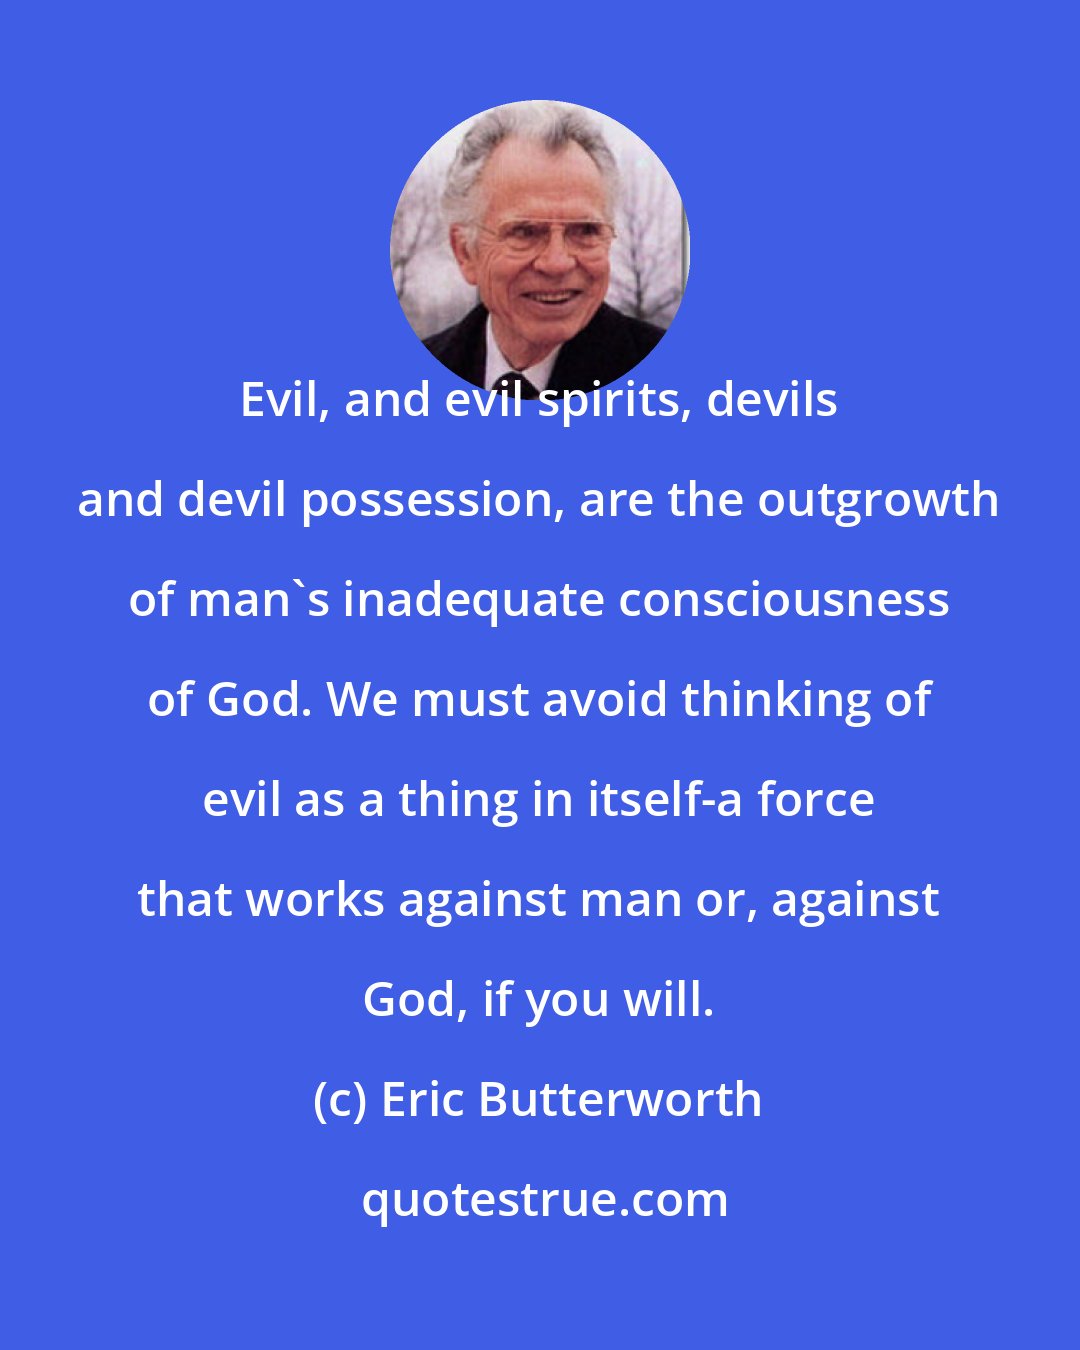 Eric Butterworth: Evil, and evil spirits, devils and devil possession, are the outgrowth of man's inadequate consciousness of God. We must avoid thinking of evil as a thing in itself-a force that works against man or, against God, if you will.